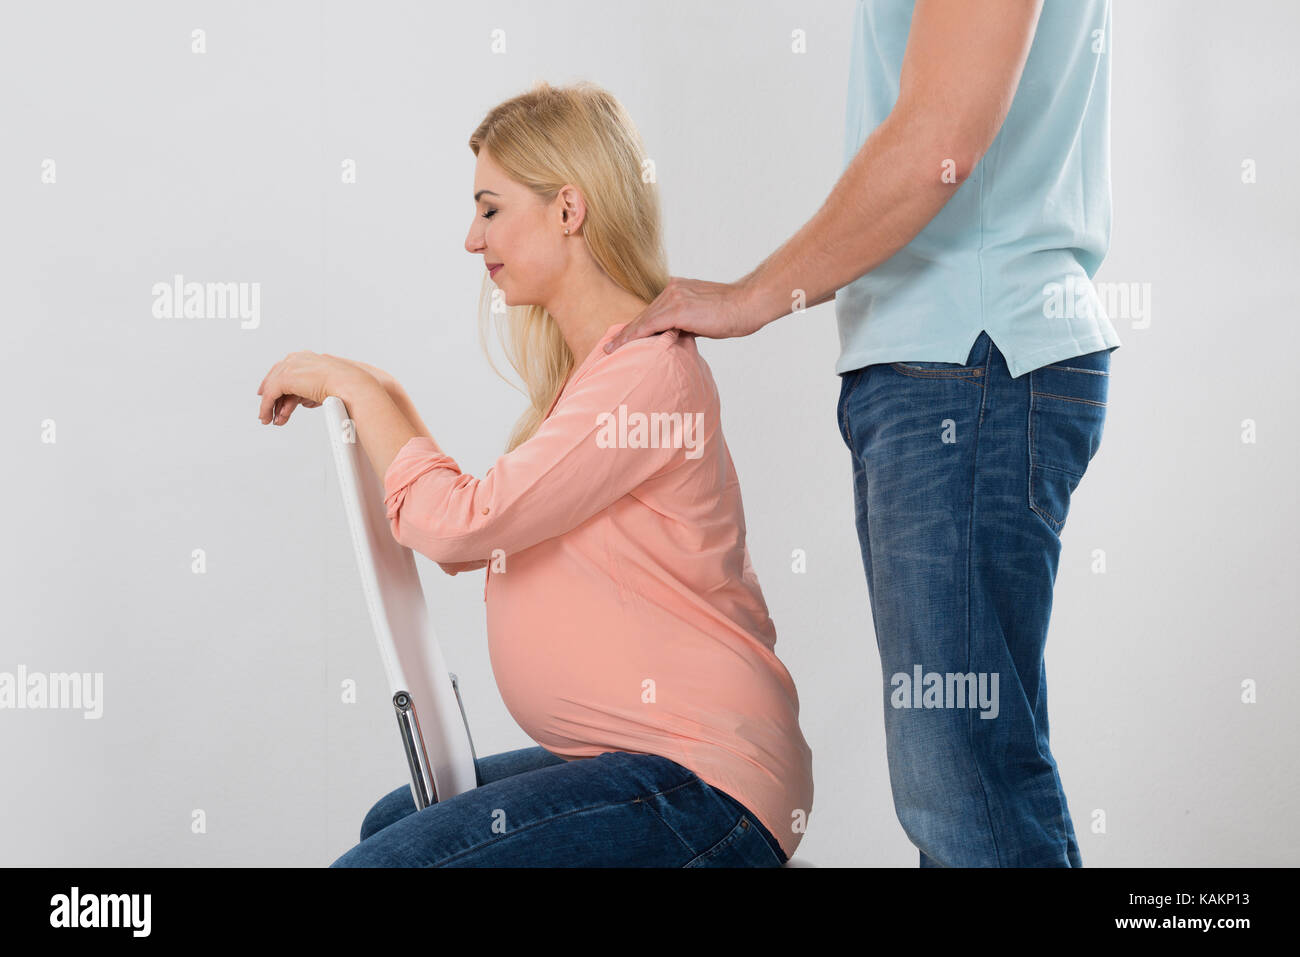 Midsection of man giving shoulder massage to pregnant woman over white background Stock Photo